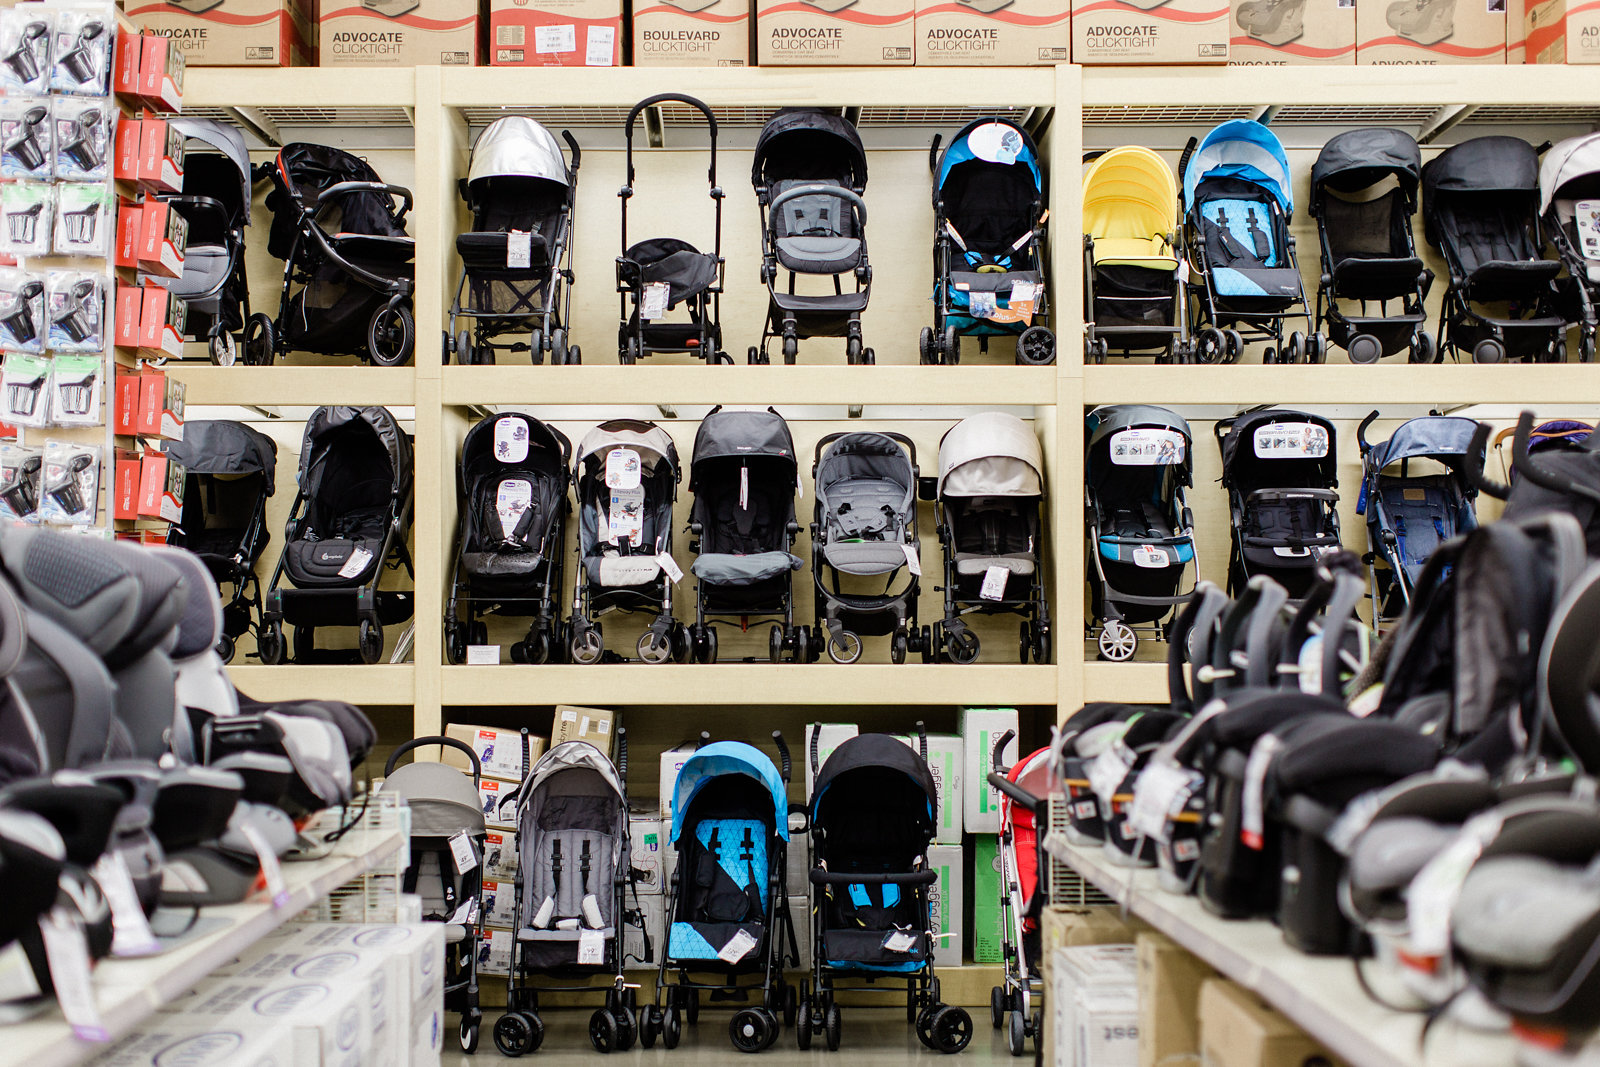 strollers and car seats